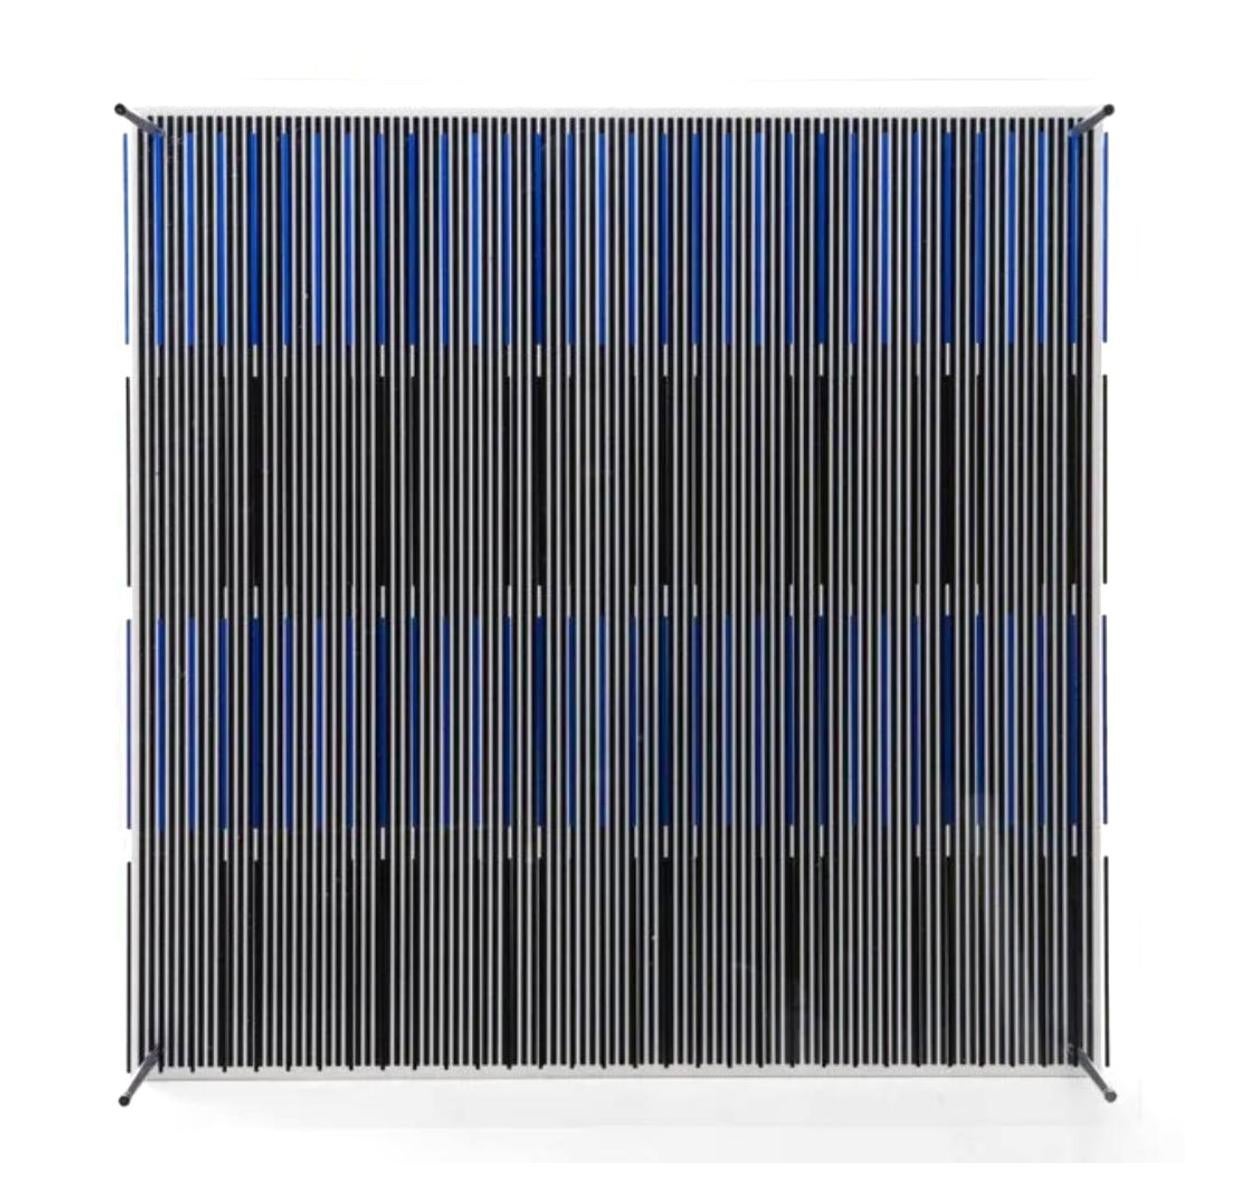 TES AZULES Y NEGRAS (3D WALL SCULPTURE) - Black Abstract Sculpture by Jesús Rafael Soto 